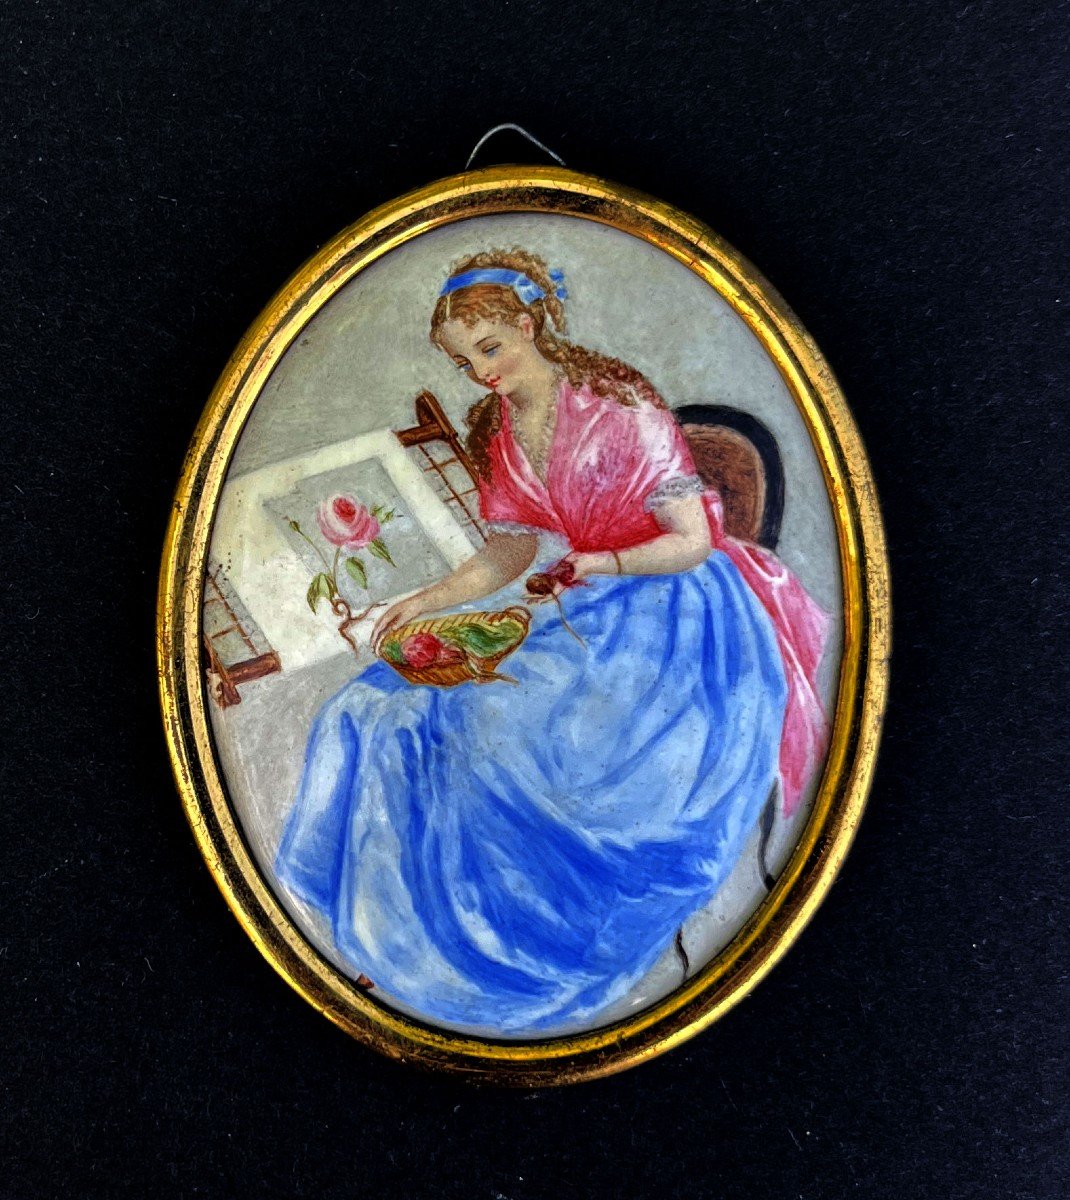 Miniature Painting On Enamel Portrait Of Beautiful Young Lady.